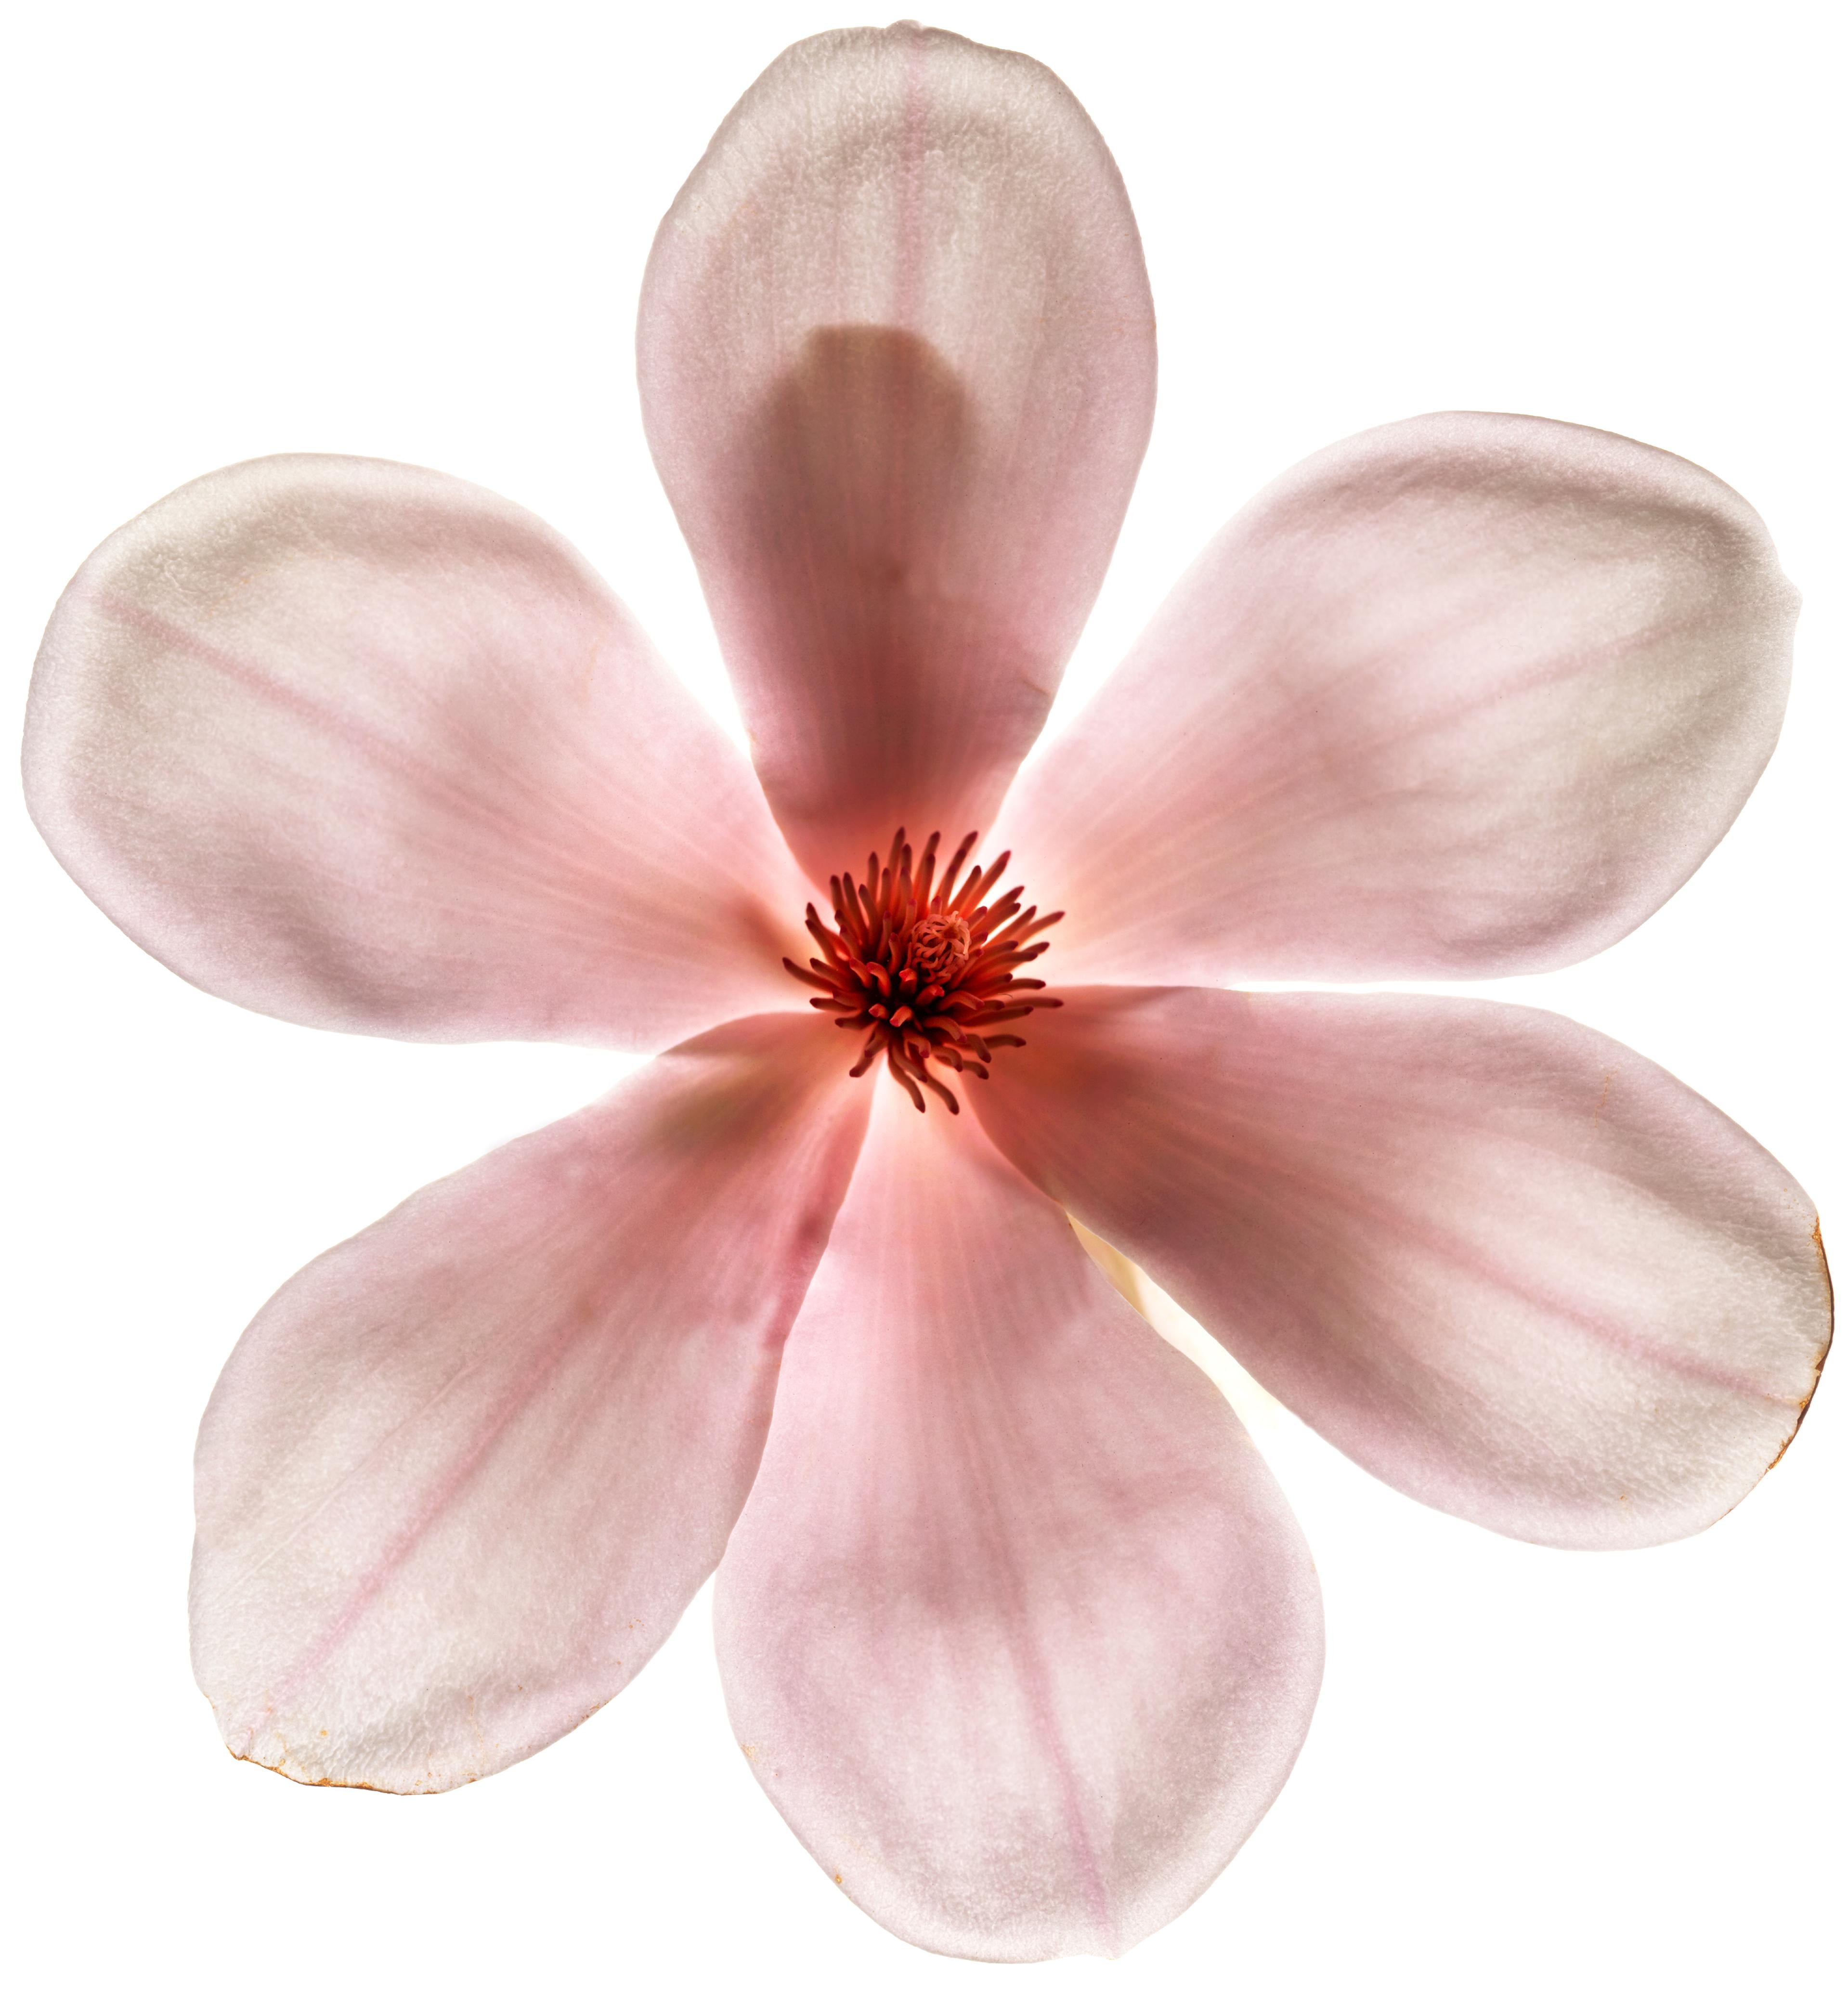 Chad Kleitsch Color Photograph - Untitled Flower # 49 (48" x 48")